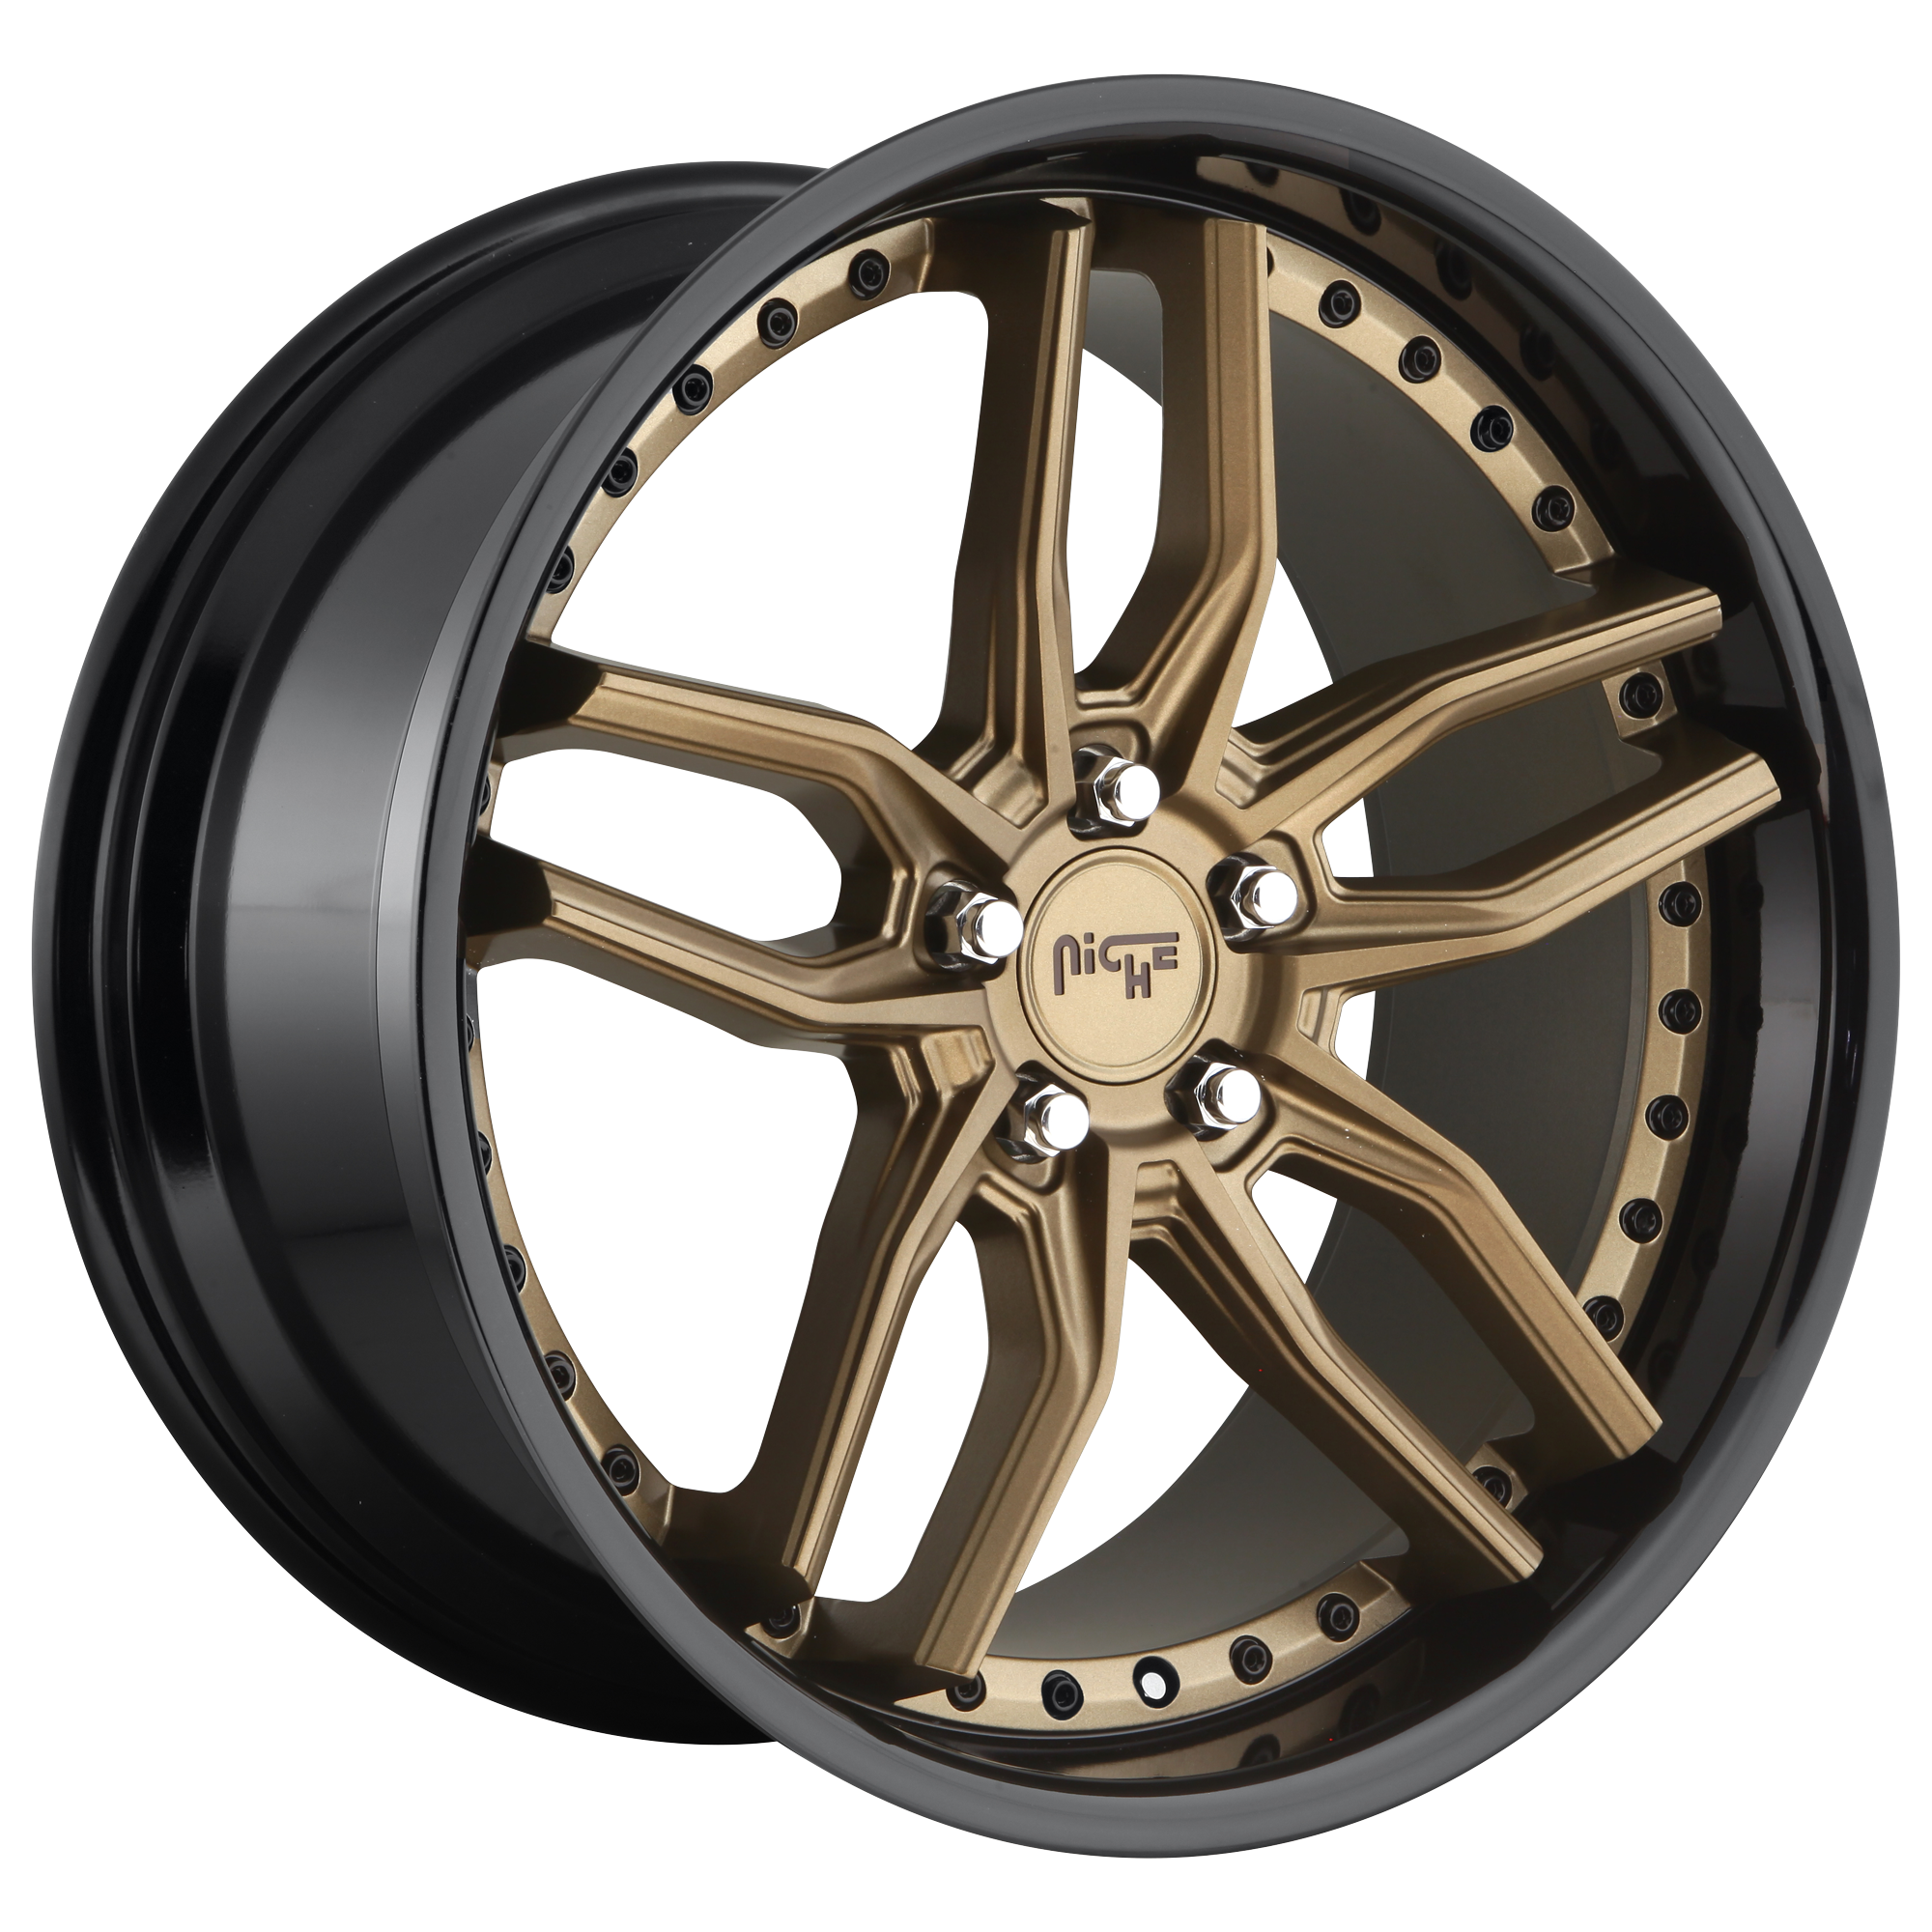 METHOS 19x8.5 5x114.30 MATTE BRONZE BLACK BEAD RING (35 mm) - Tires and Engine Performance